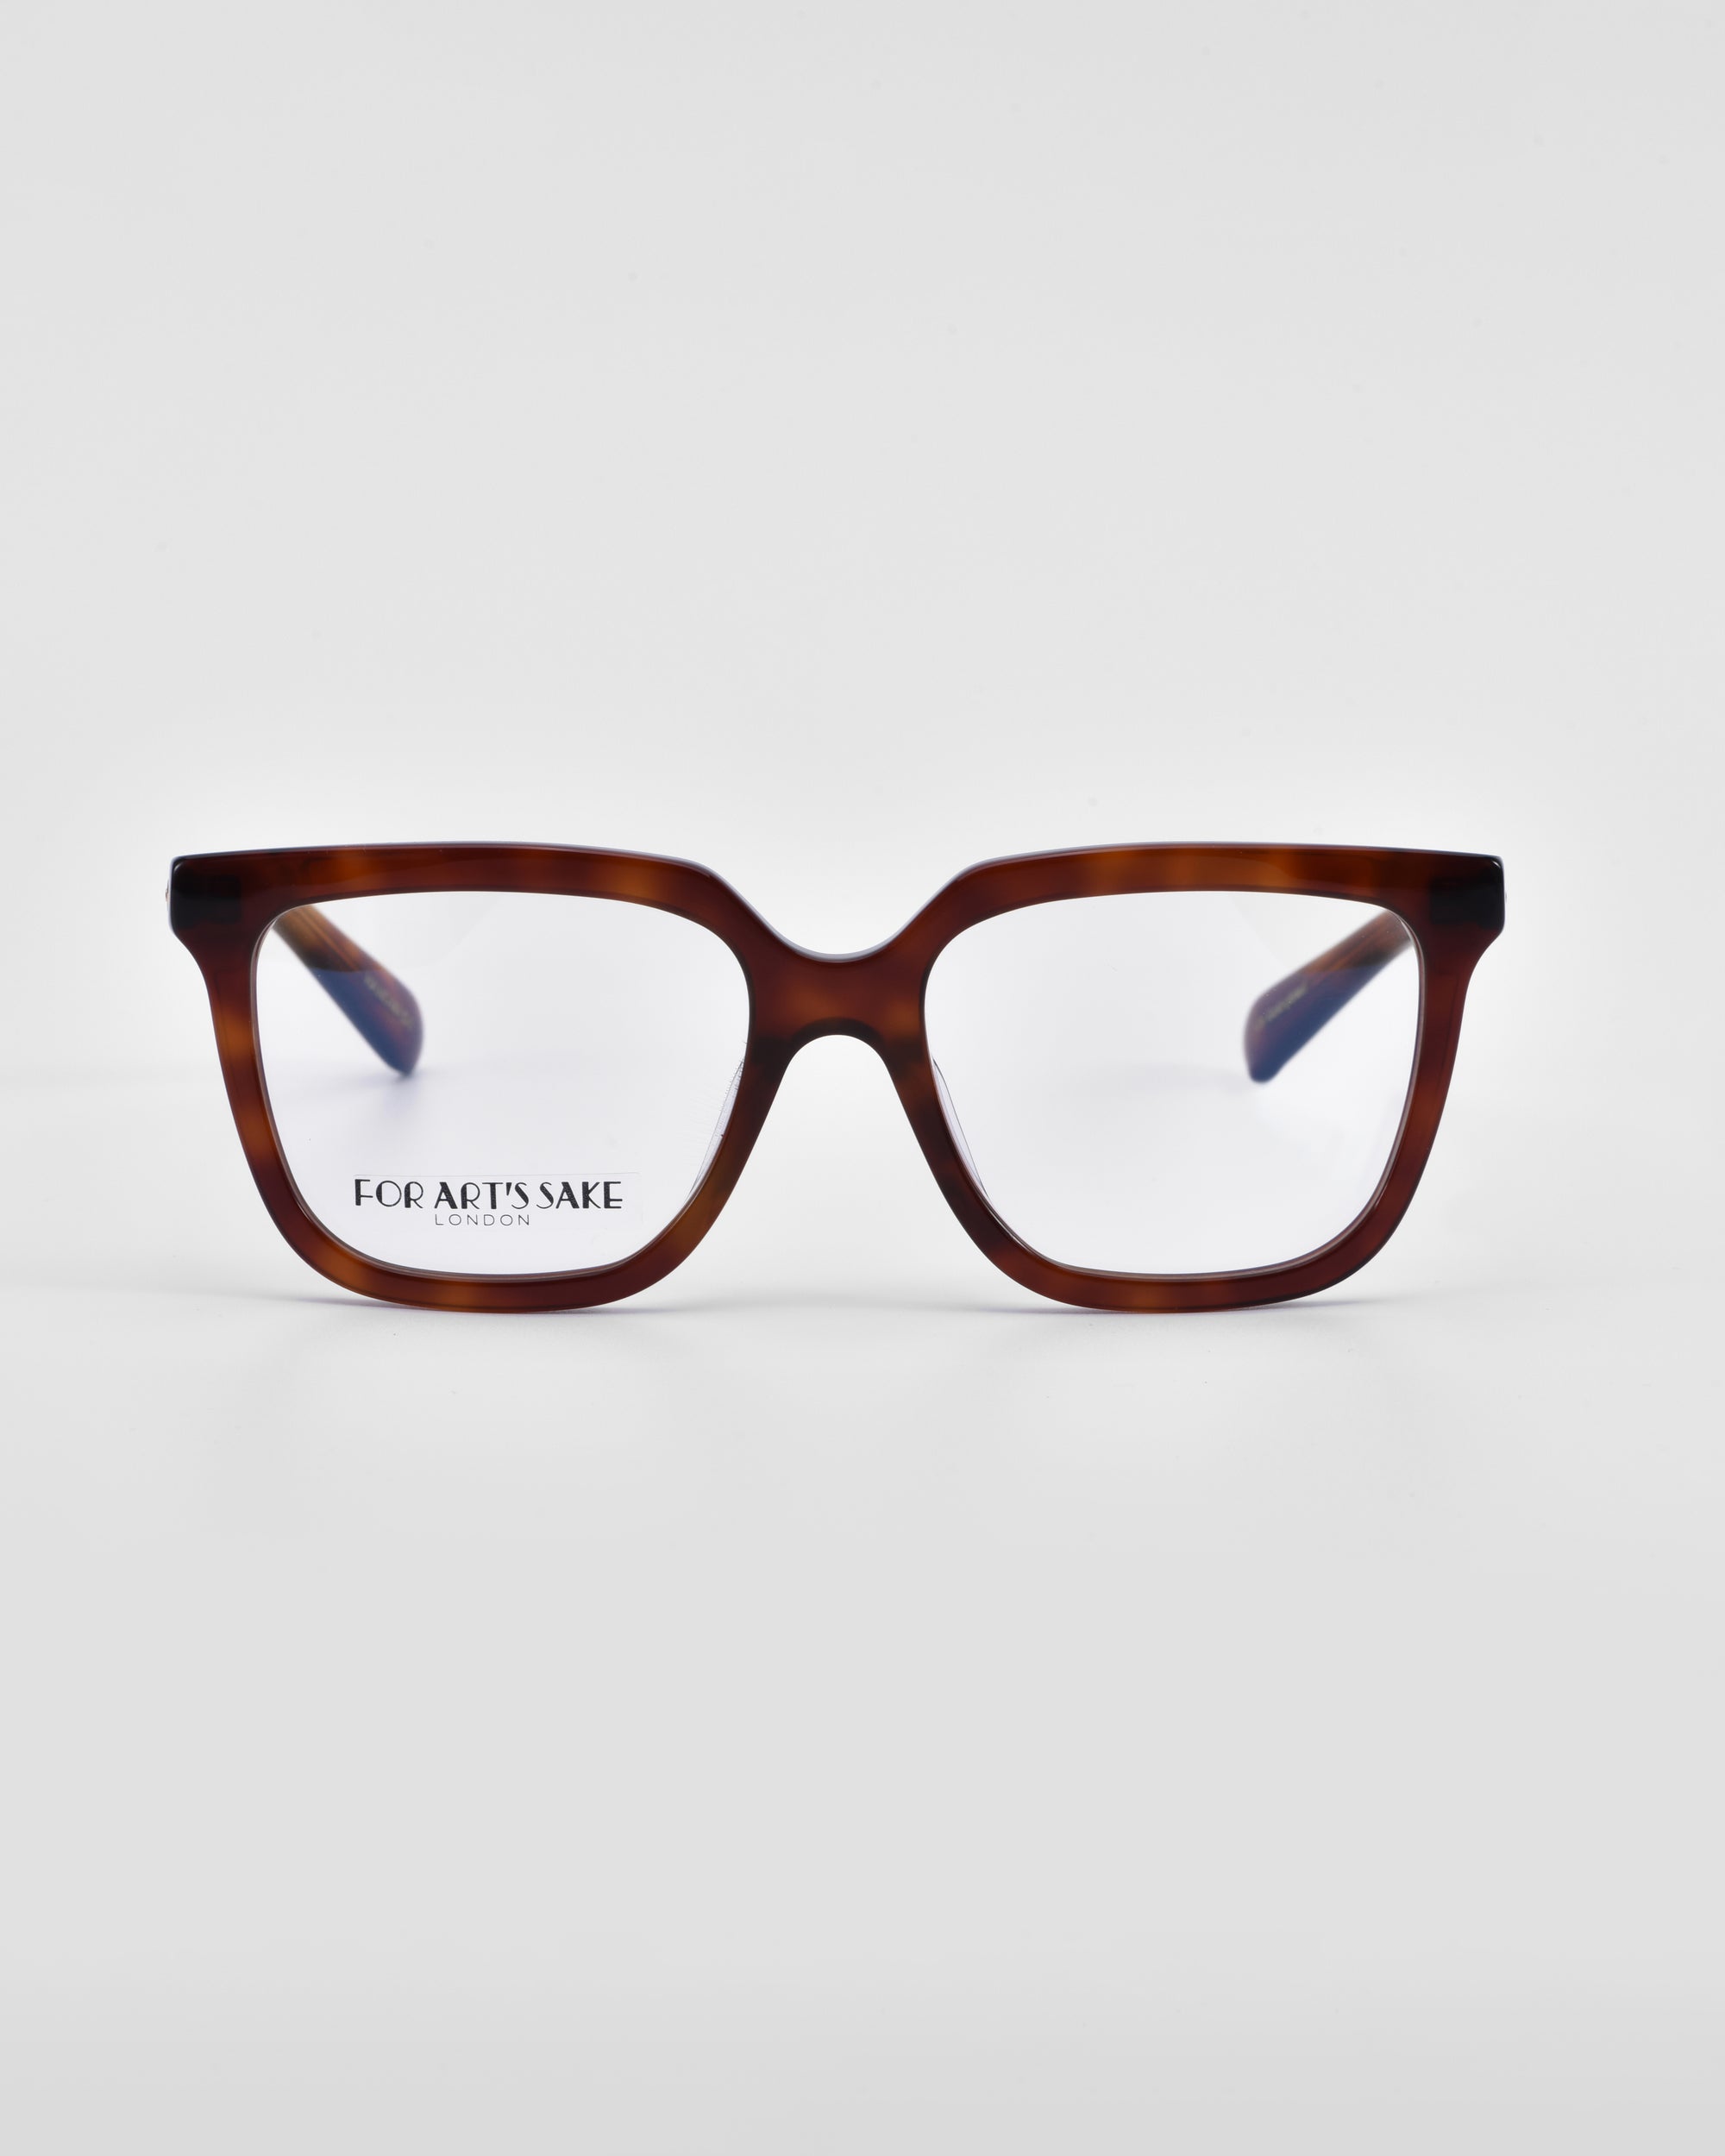 A pair of tortoiseshell eyeglasses with a classic square silhouette on a plain white background. The glasses have clear lenses, and the brand name "For Art's Sake®" is visible on the left lens, offering an elegant option for those seeking a prescription service. The product name is Nina.